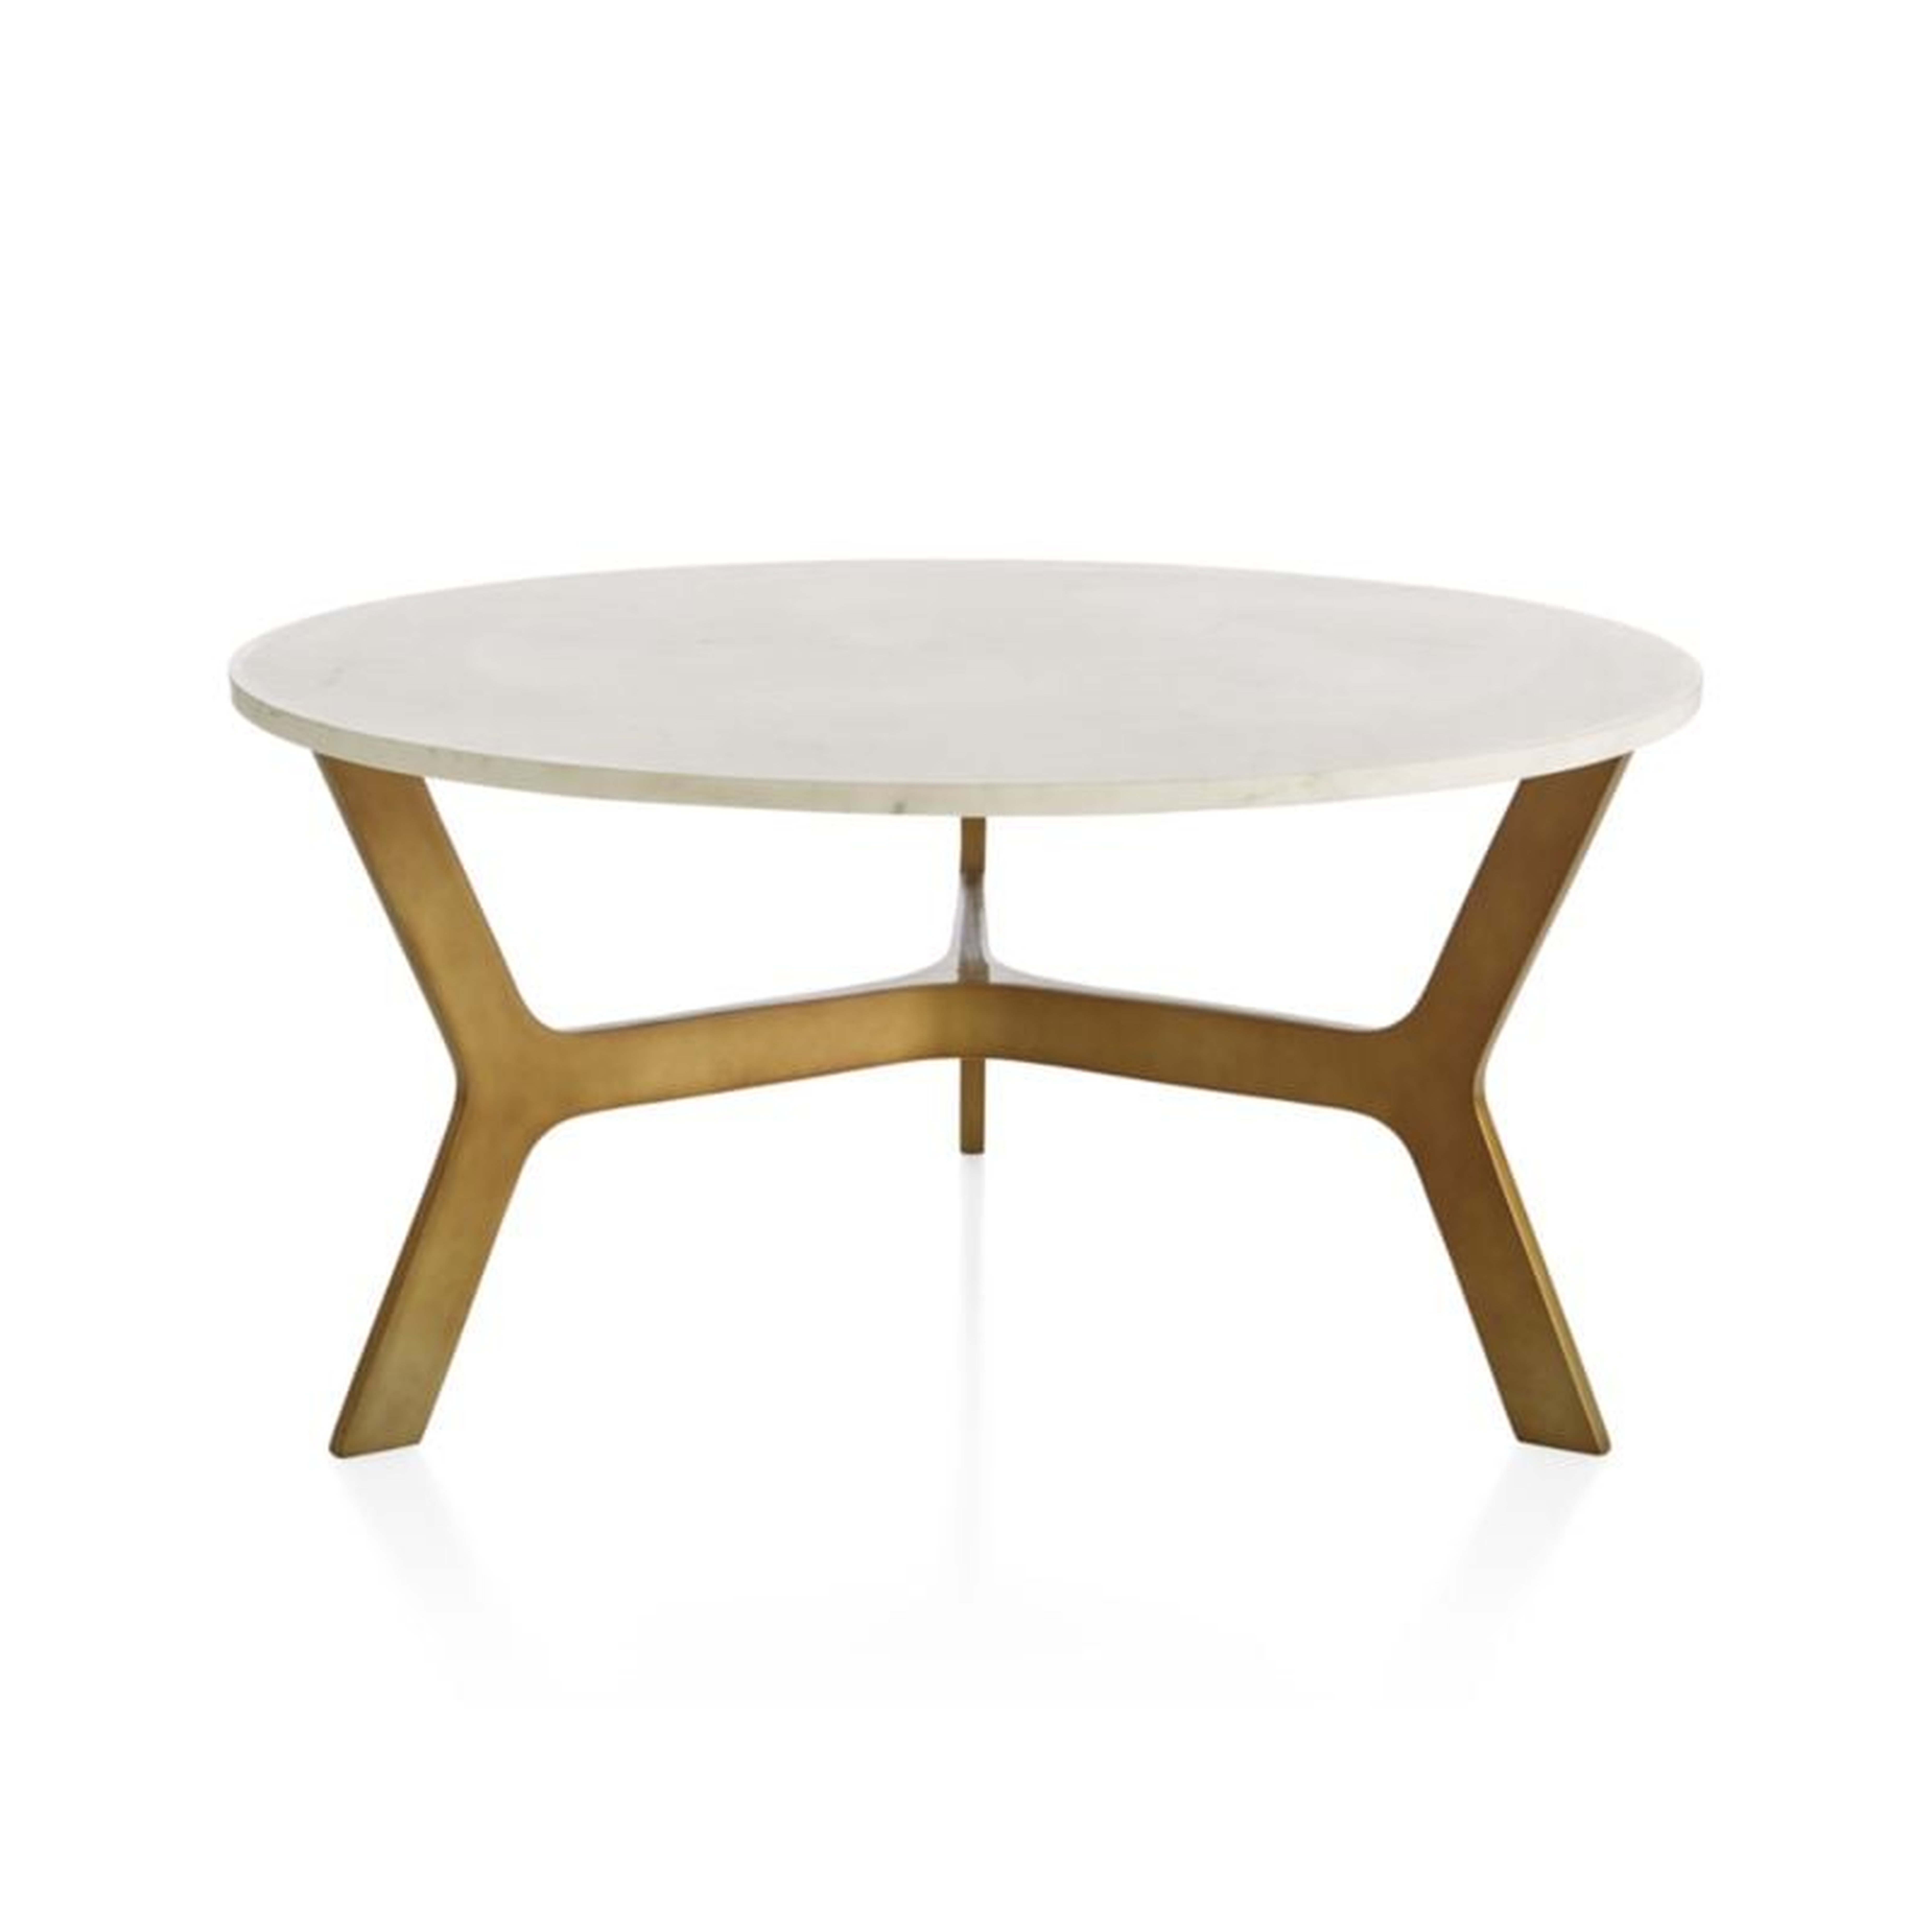 Elke White Marble and Brass Aluminum 35.5" Rectangular Coffee Table - Crate and Barrel